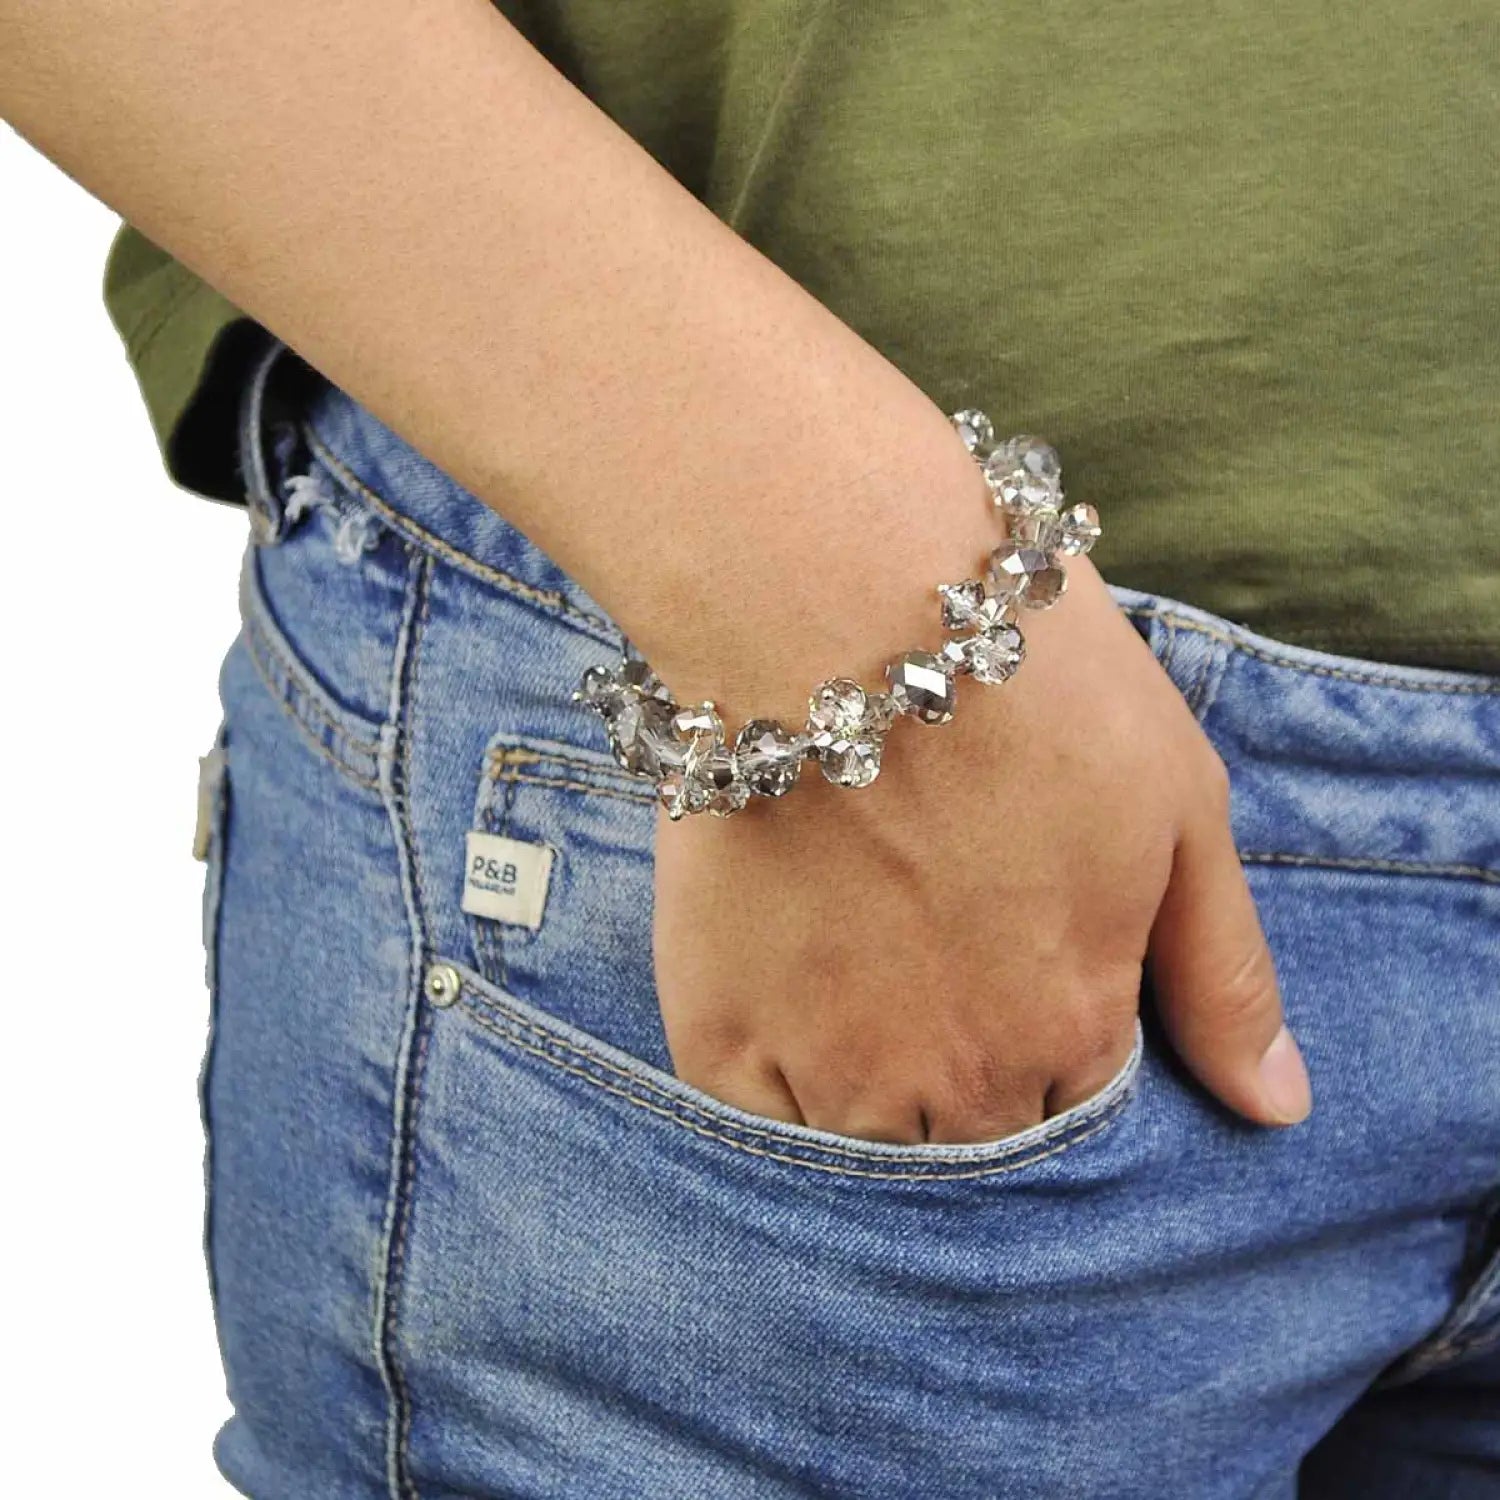 Woman wearing flower design bracelet with crystal glass beads.